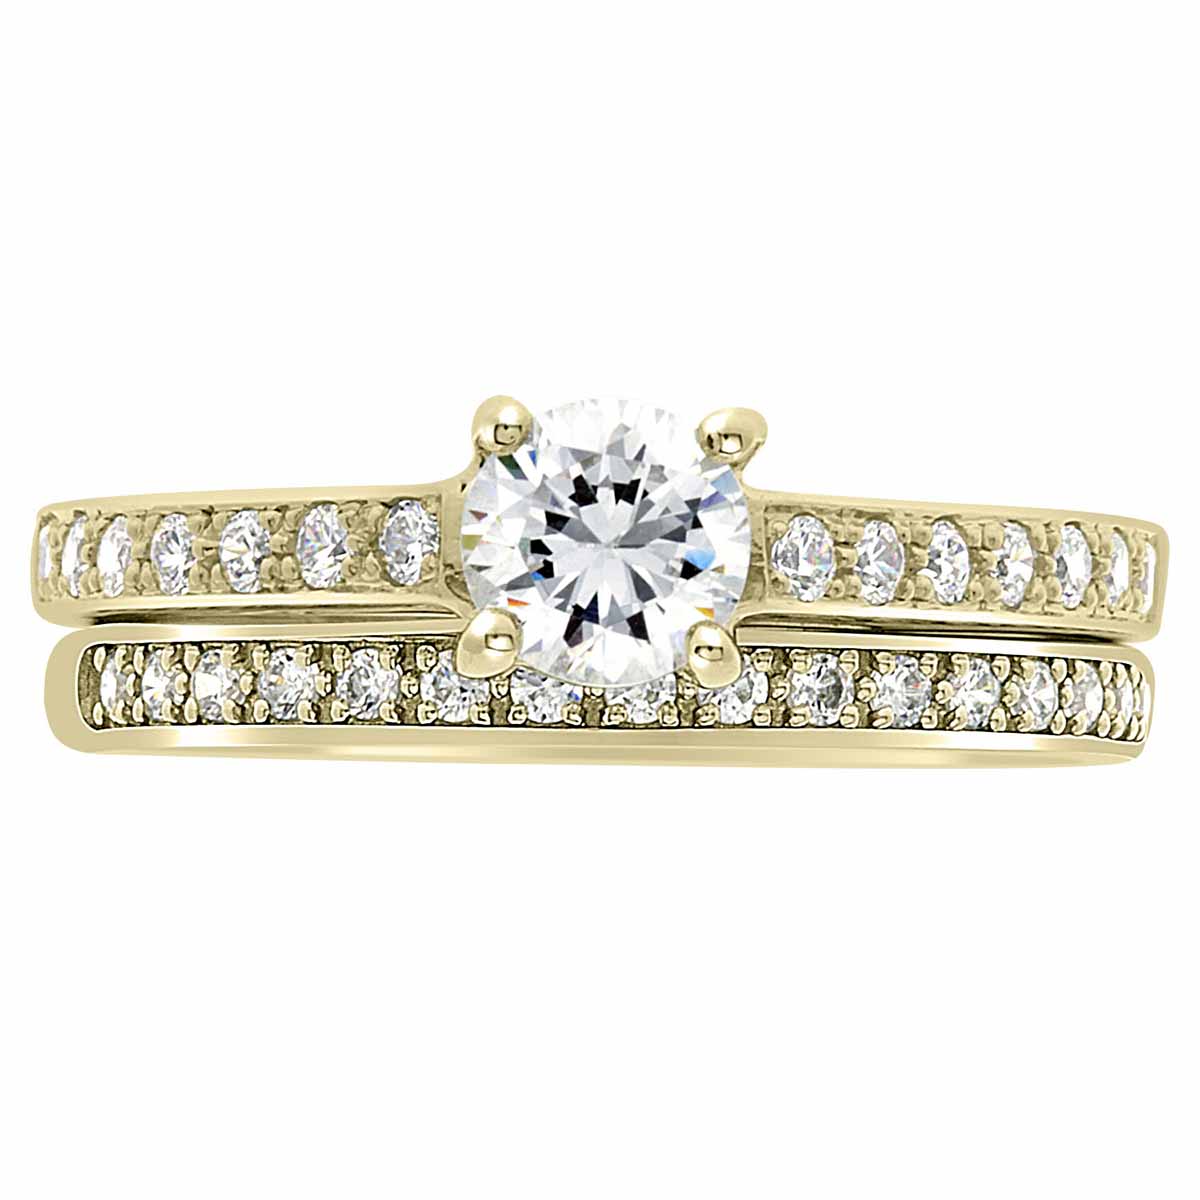 Princess Cut Bezel Ring set in yellow gold pictured with a diamond set wedding ring